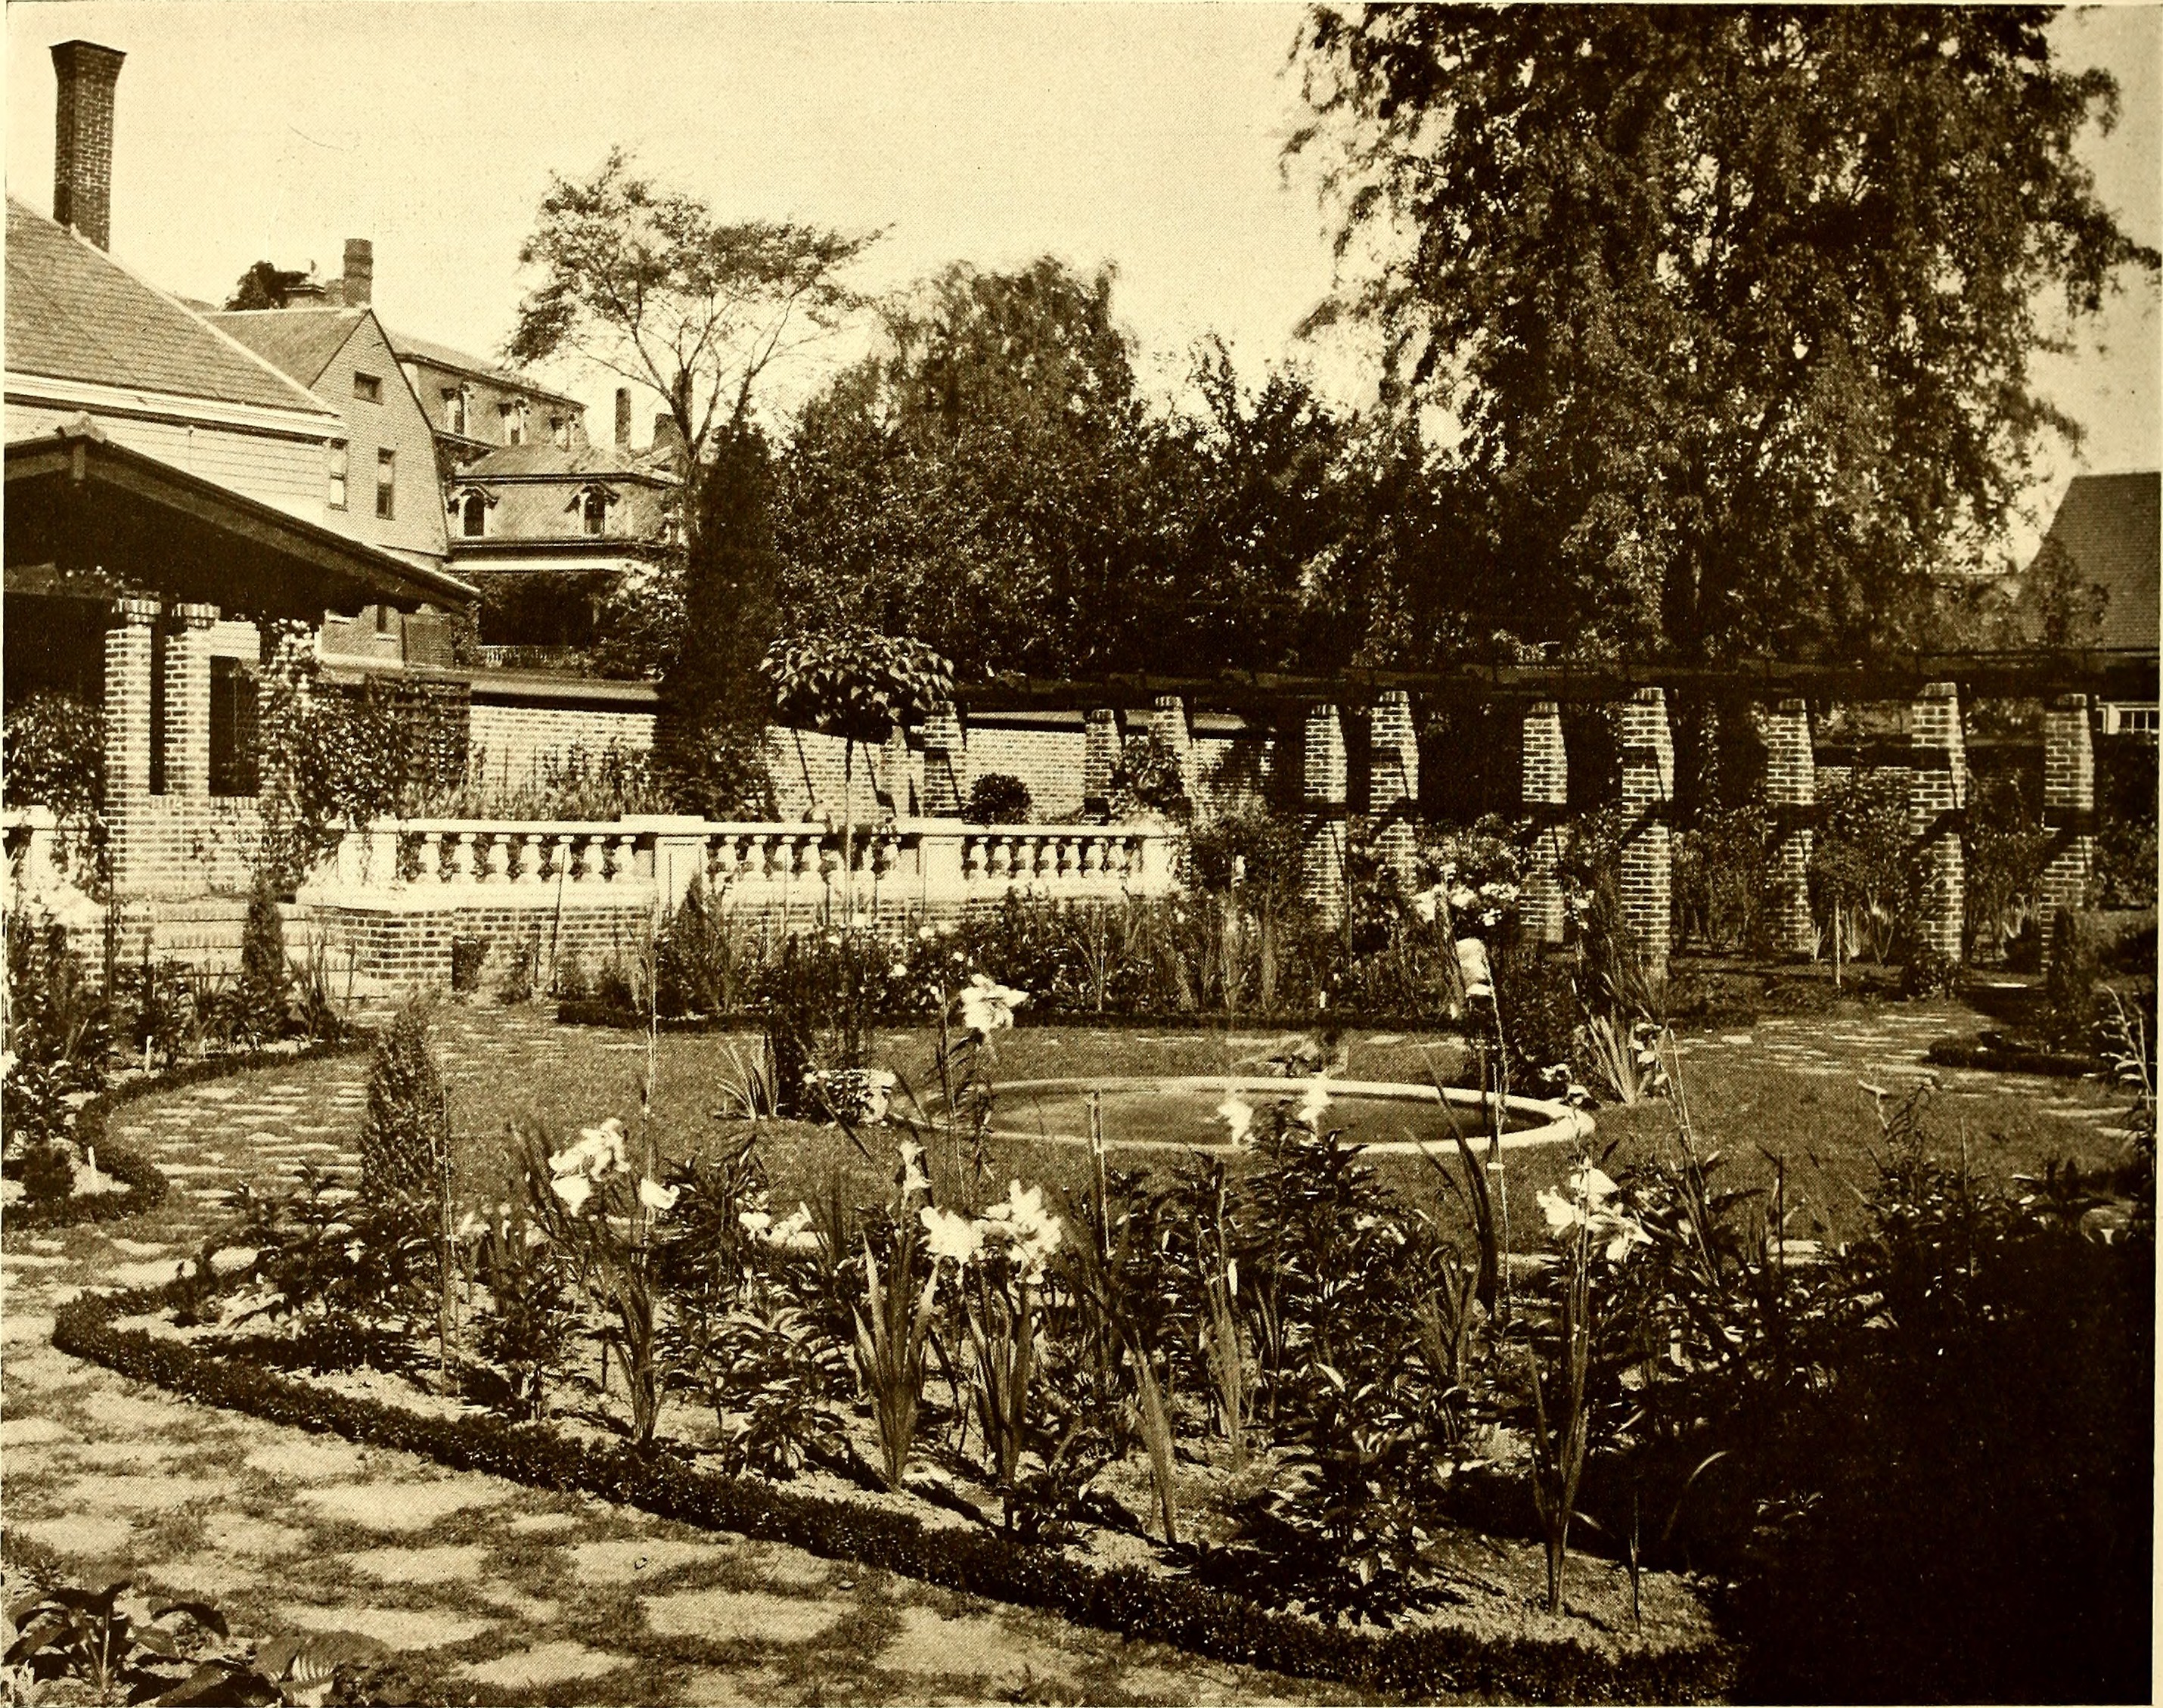 File:American homes and gardens (1907) (17966745918).jpg - Wikimedia Commons